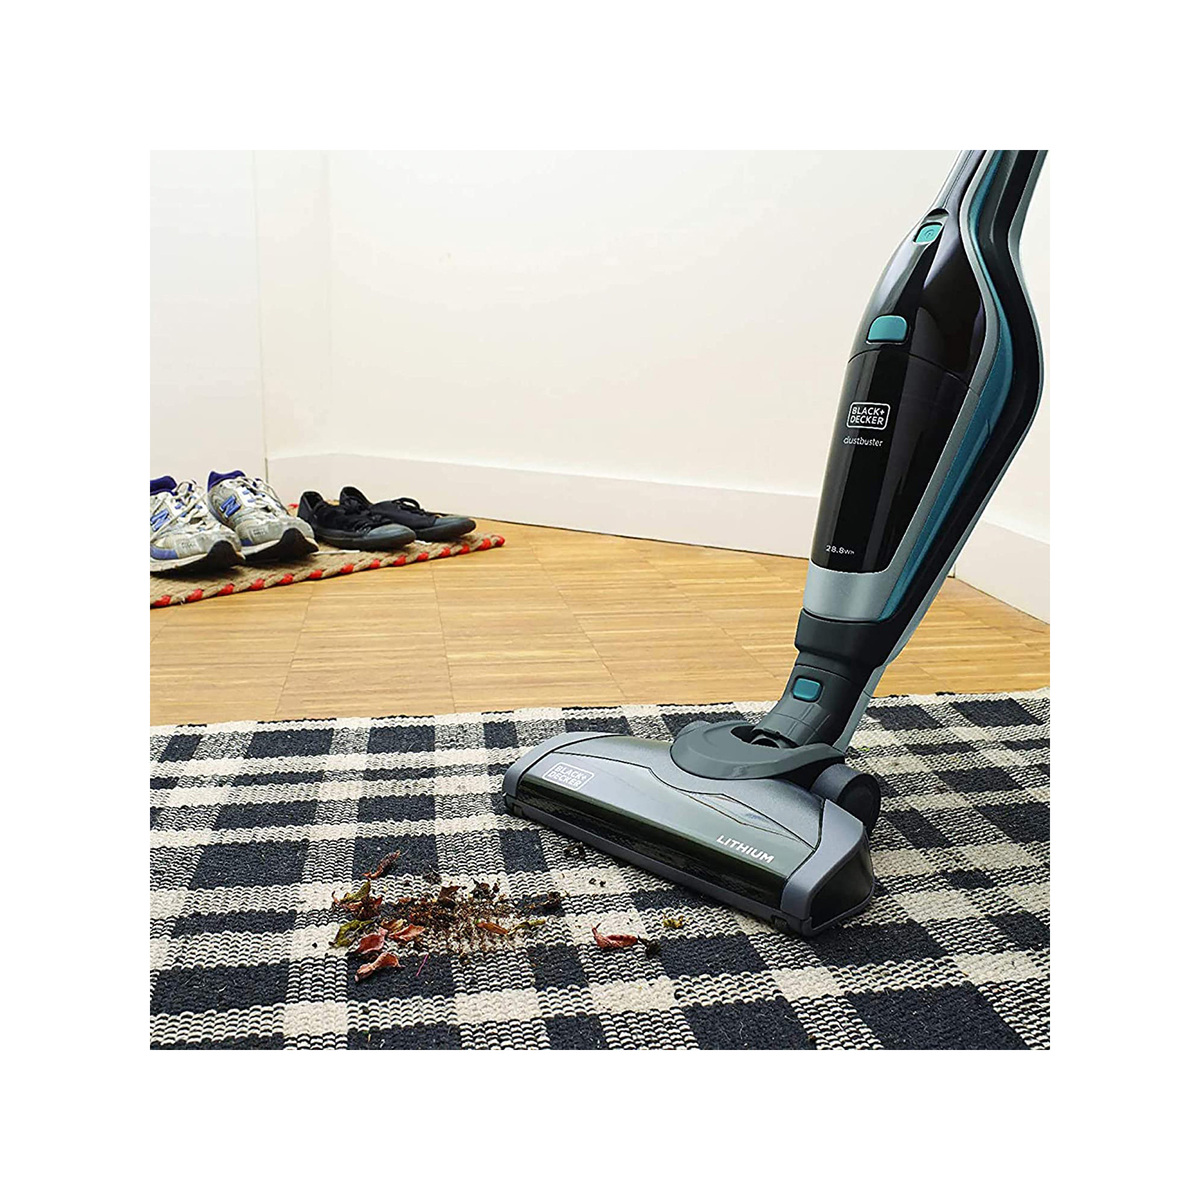 Black & Decker Chargers Charger broom Vacuum Cleaner SVA420B